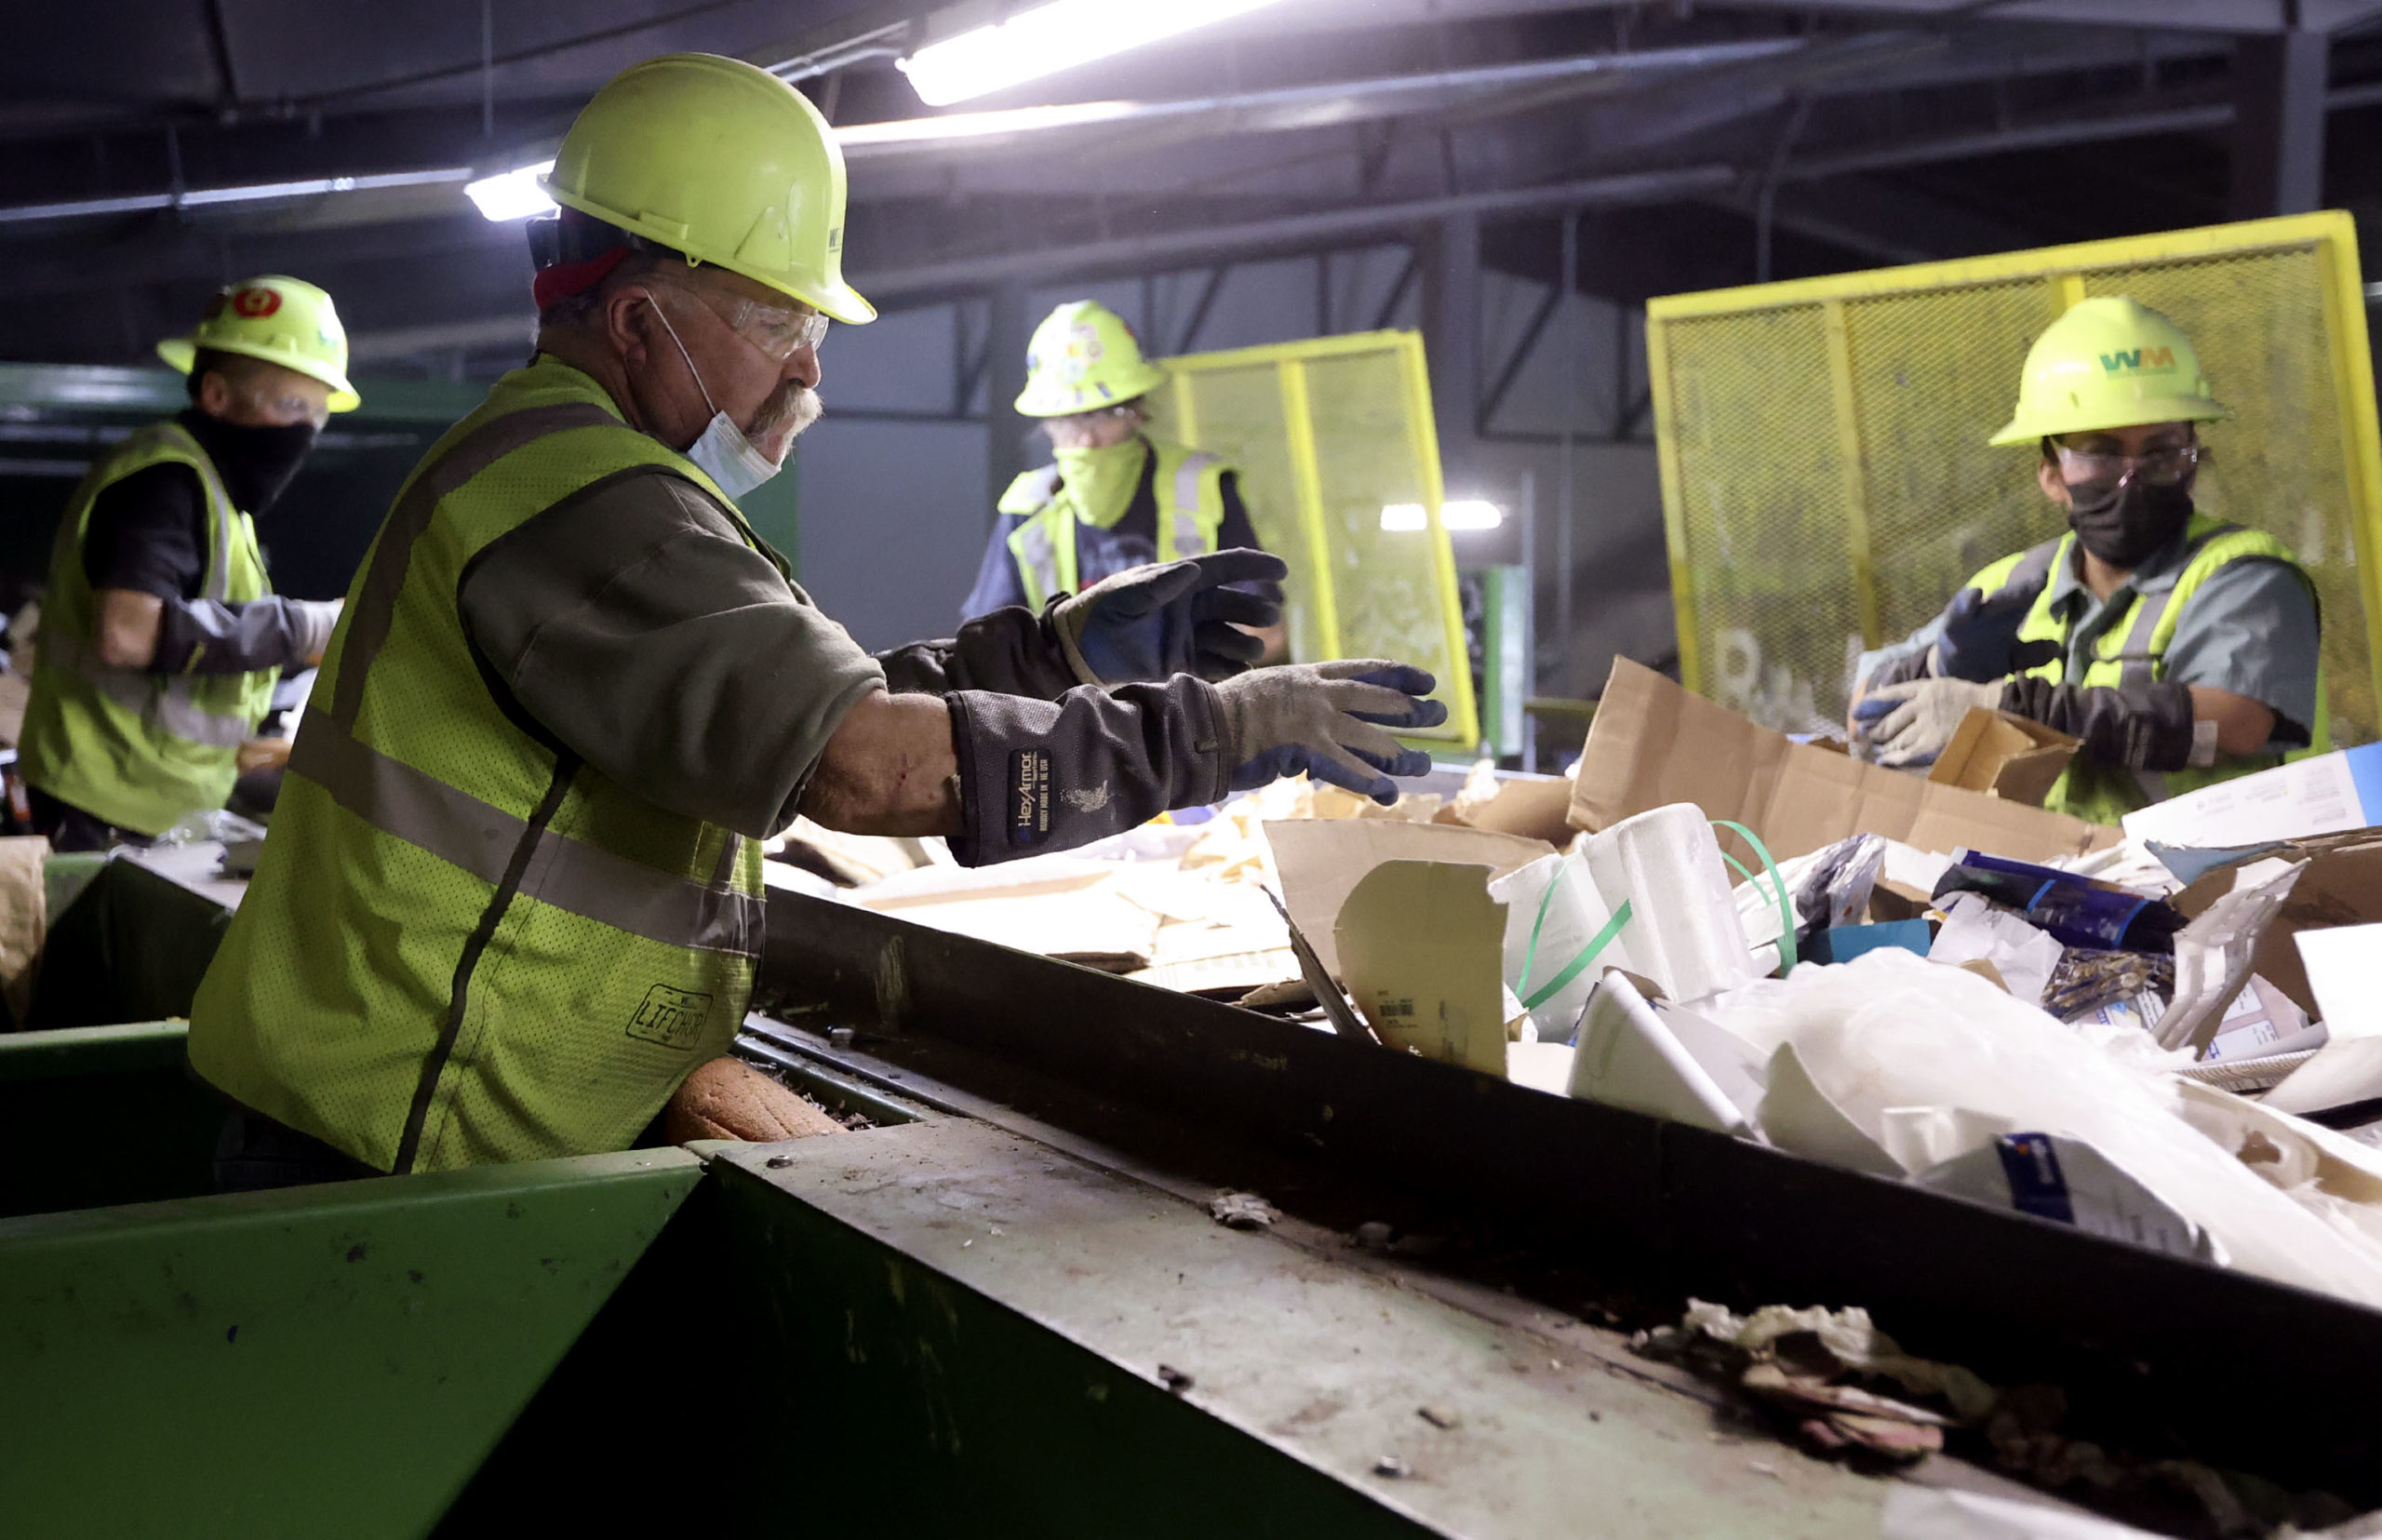 Waste Management workers sorting waste on an assembly line...